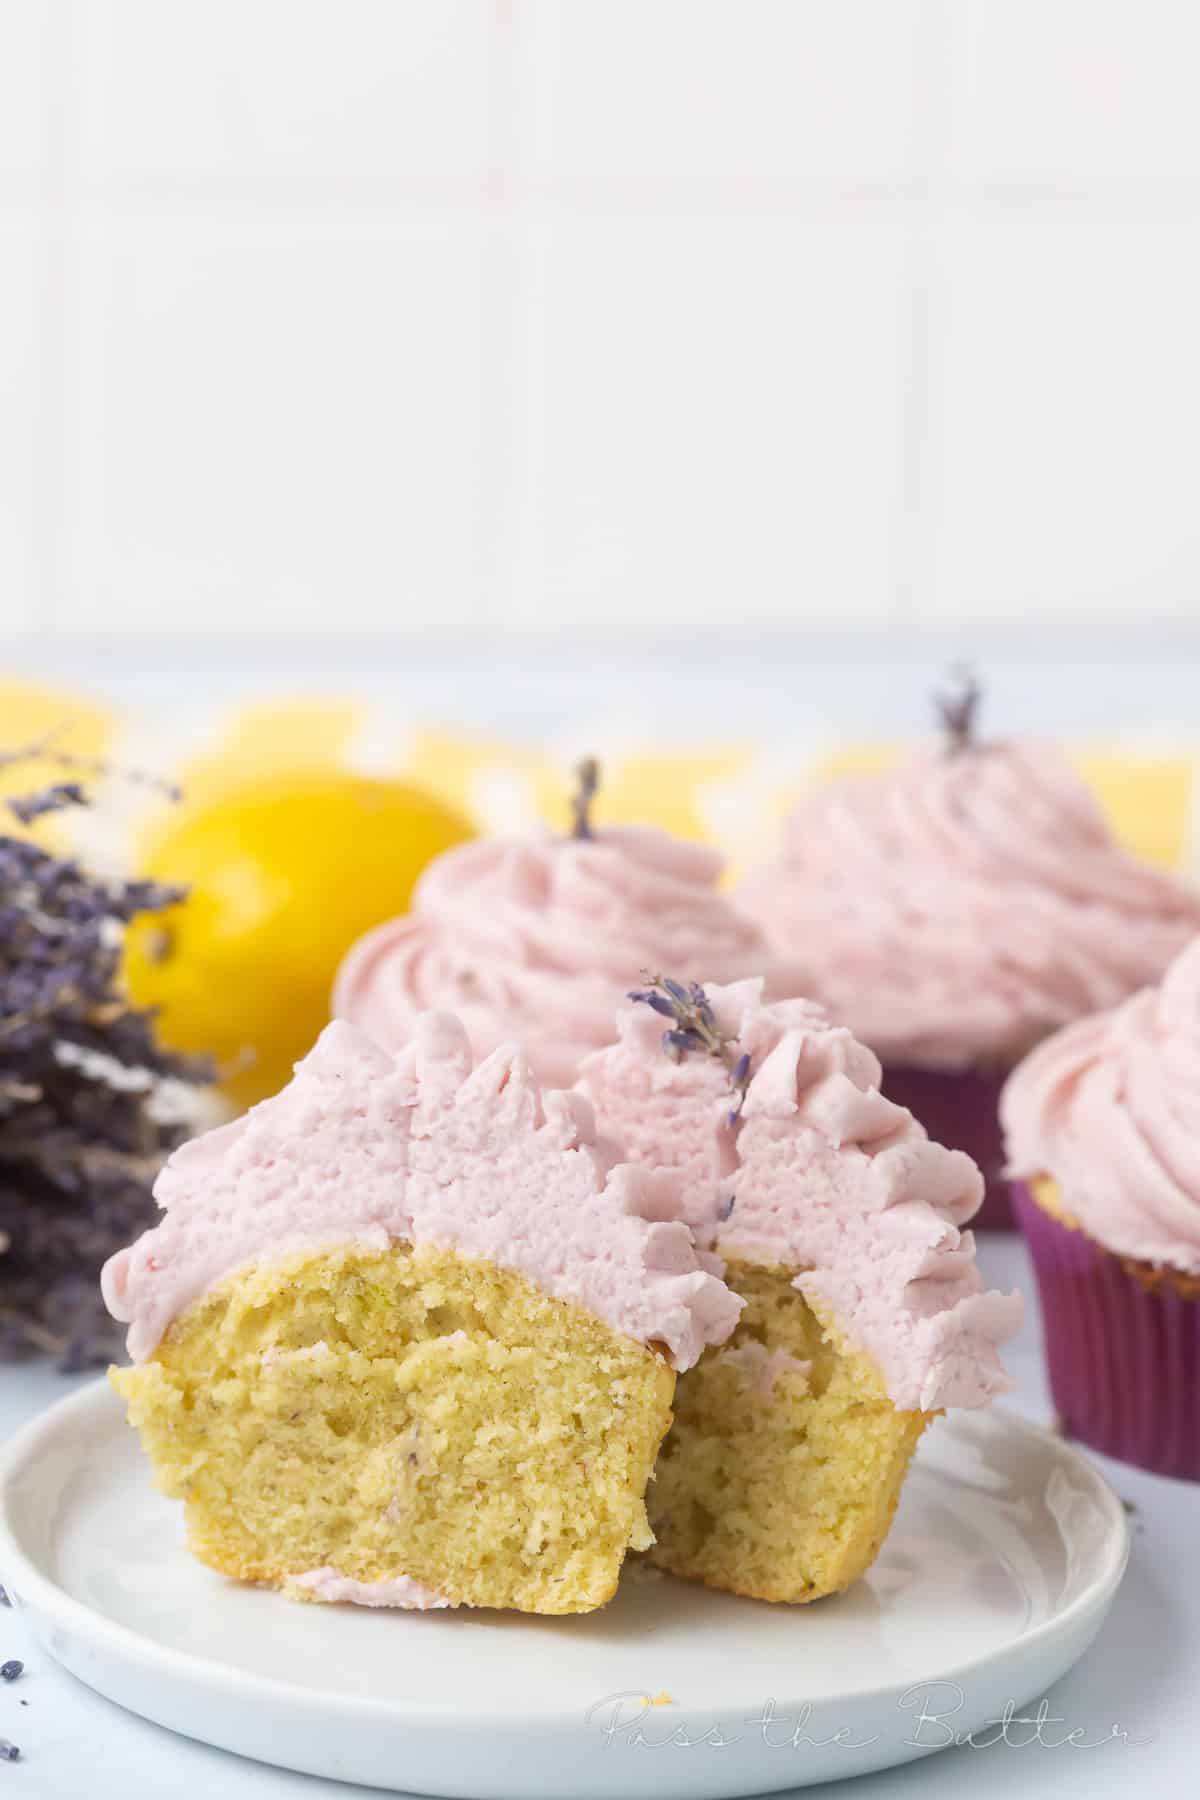 lavender cupcakes on a marble countertop. One is cut in half.